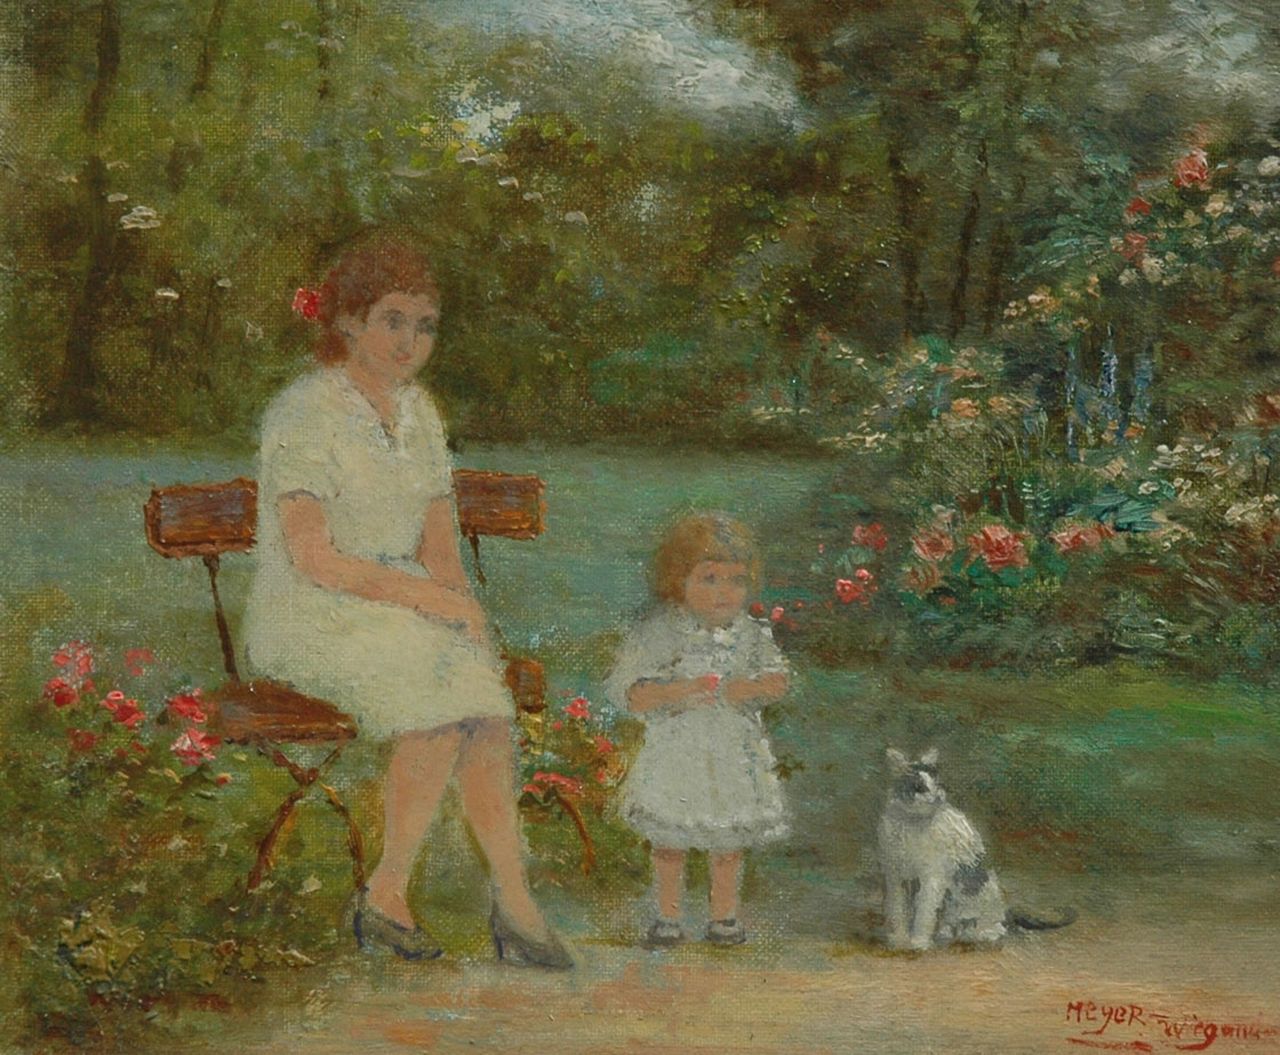 Meyer-Wiegand R.D.  | Rolf Dieter Meyer-Wiegand, In the garden, oil on canvas laid down on panel 13.4 x 15.9 cm, signed l.r.